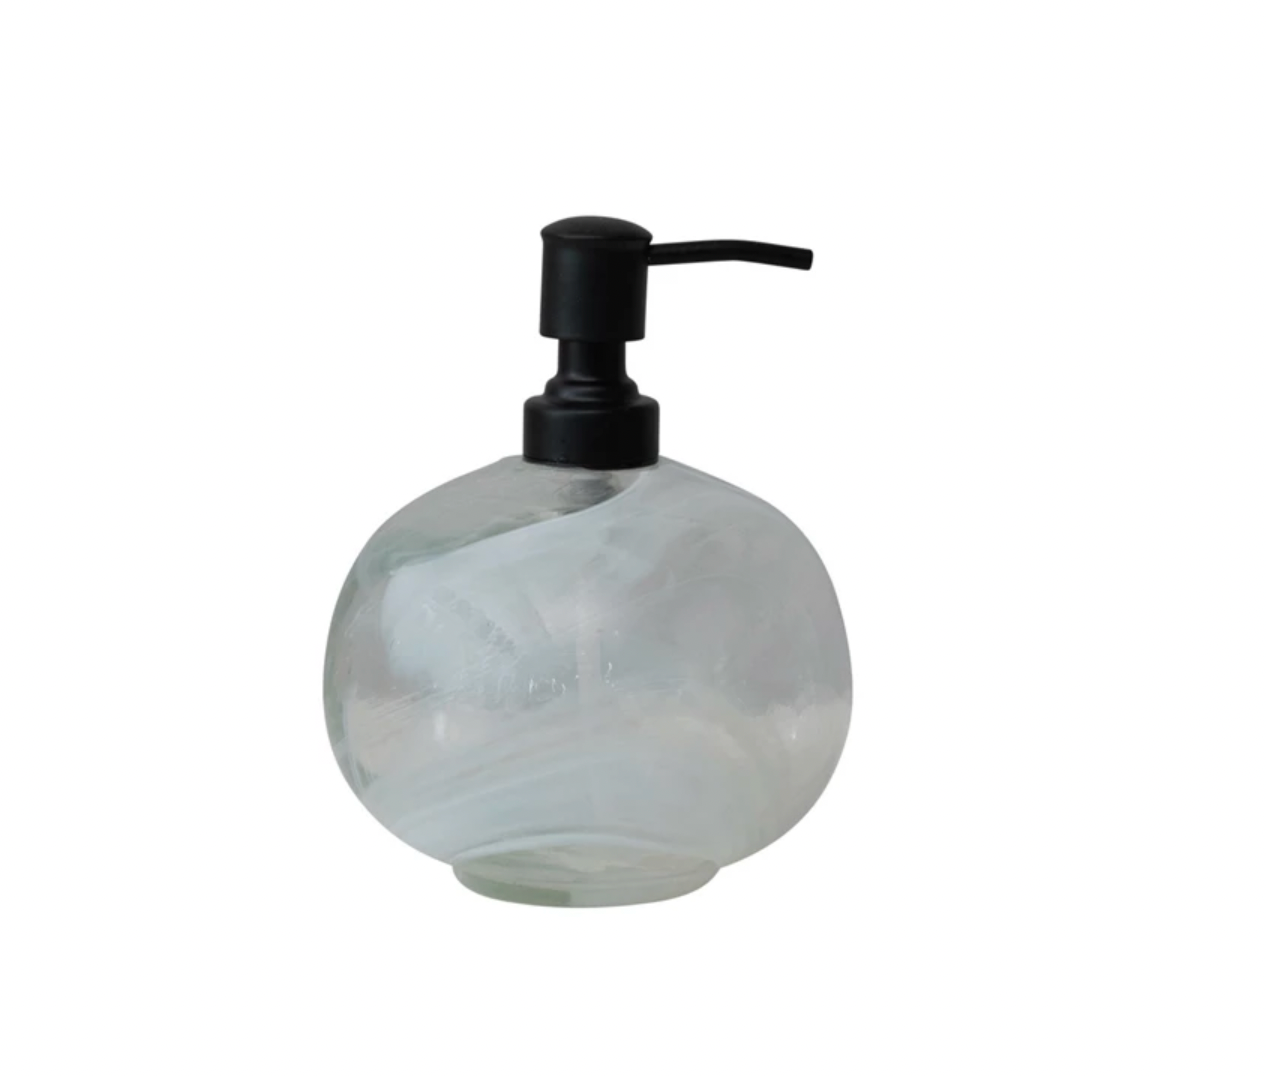 Marbled Glass Soap Dispenser with Pump